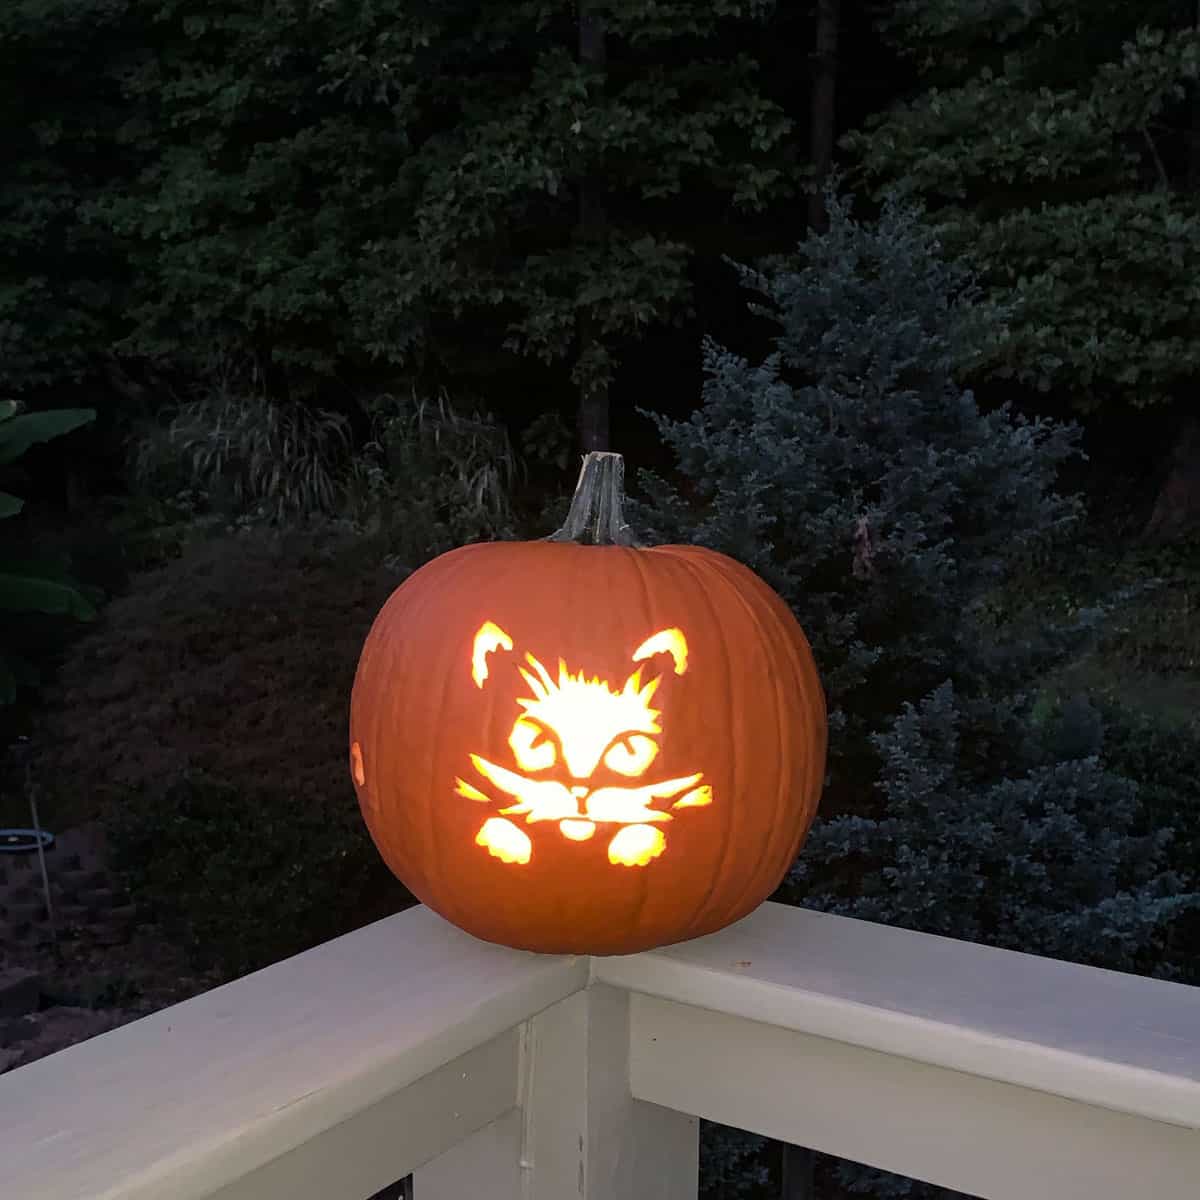 carved face of cat jack o lantern lit with candle on porch railing